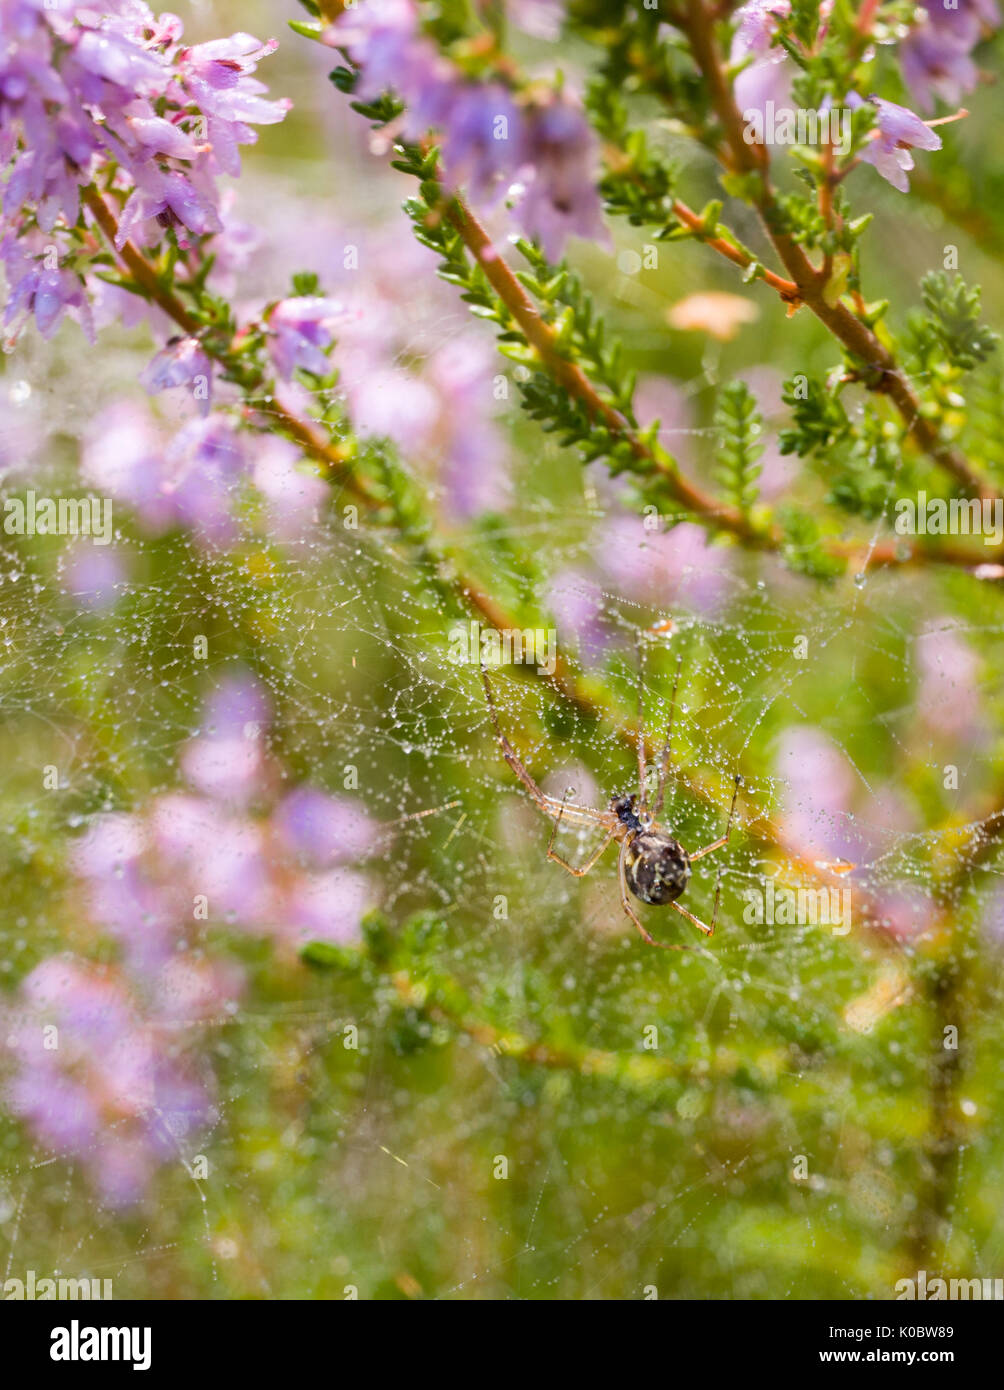 Close up macro view of spider (Araneae) outdoors constructing spider web covering purple heather (Calluna vulgaris) or common heather  Model Release: No.  Property Release: No. Stock Photo